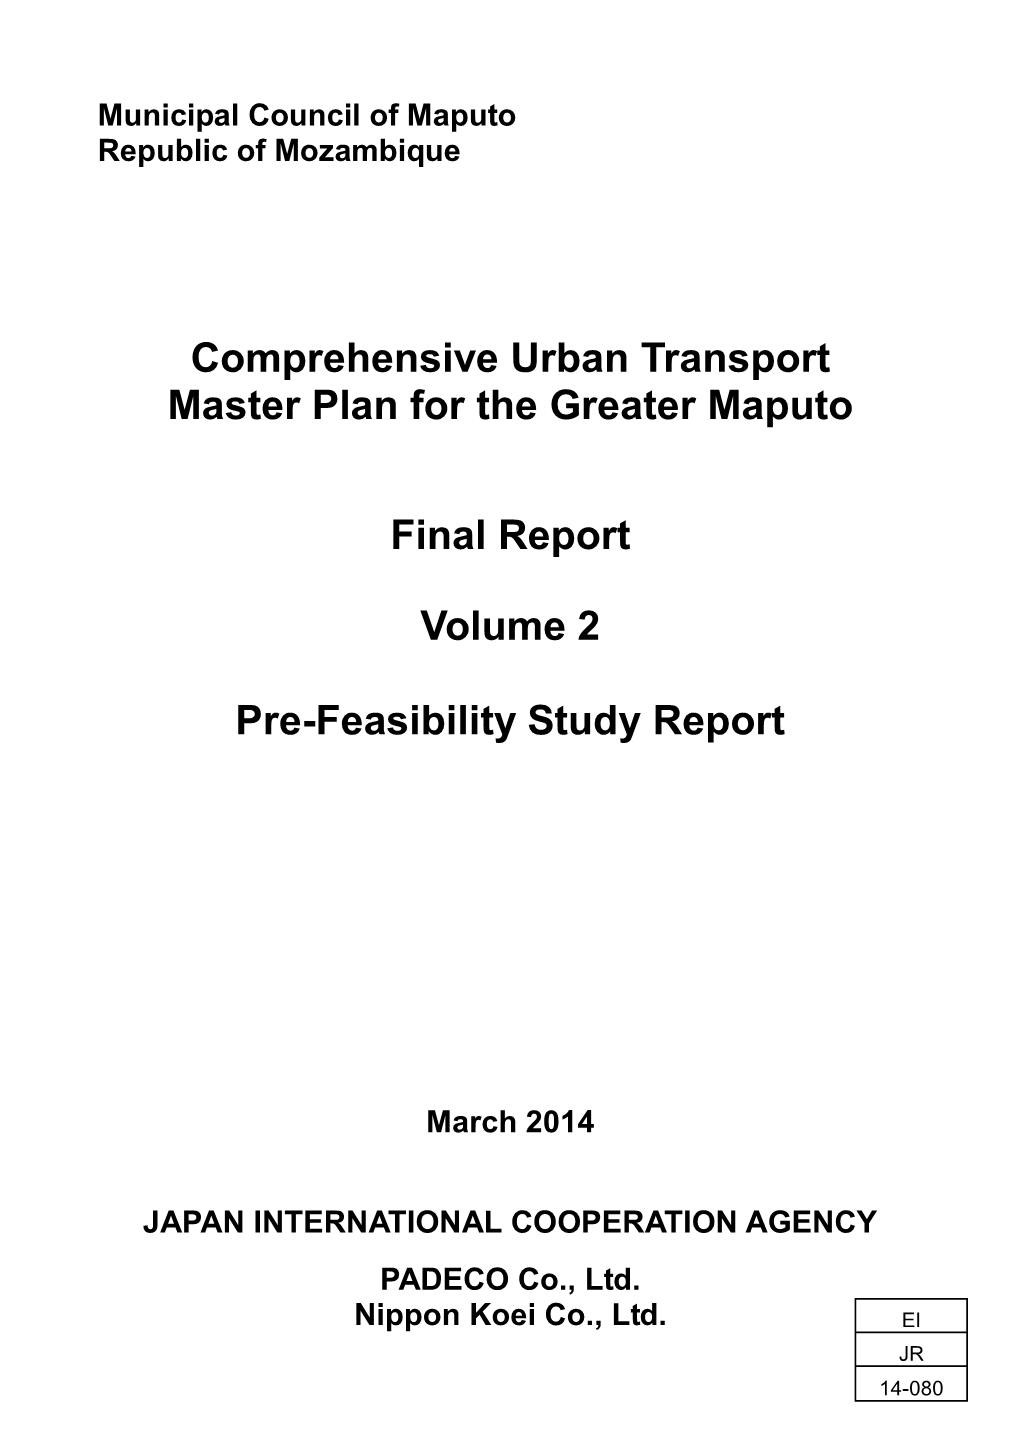 Comprehensive Urban Transport Master Plan for the Greater Maputo